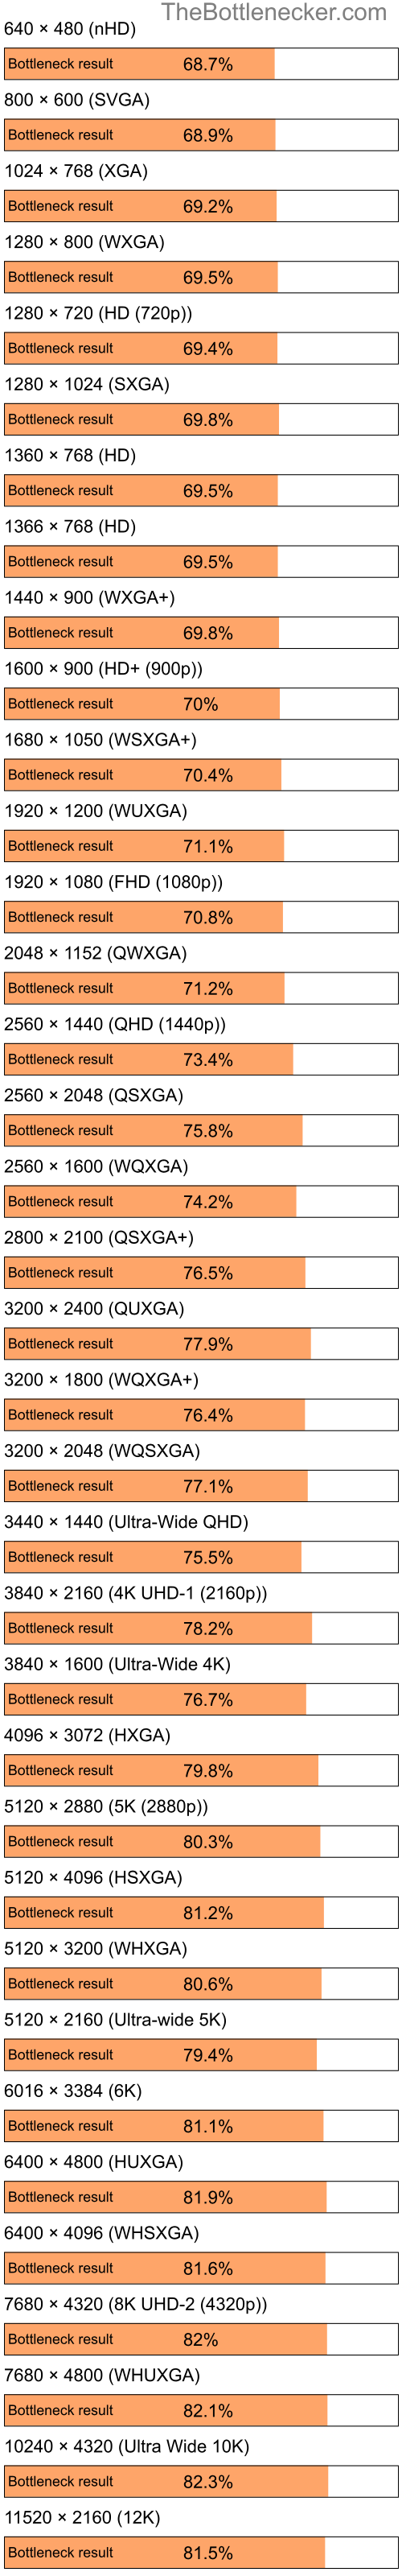 Bottleneck results by resolution for Intel Atom Z520 and NVIDIA Quadro FX 550 in General Tasks